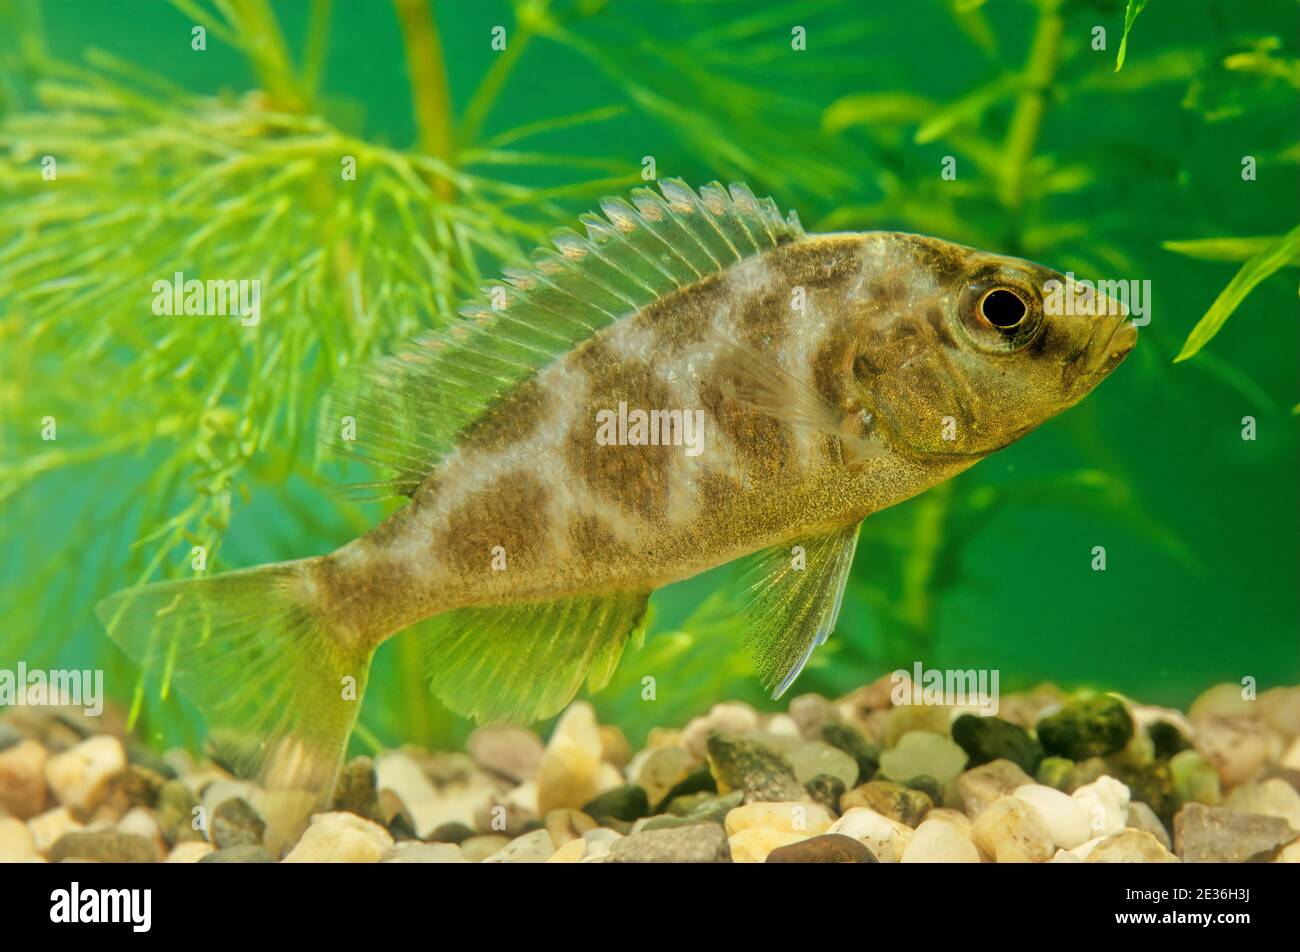 Nimbochromis venustus, commonly called venustus hap or giraffe hap, is a Haplochromine cichlid endemid to Lake Malawi in Africa. It prefers the deeper Stock Photo